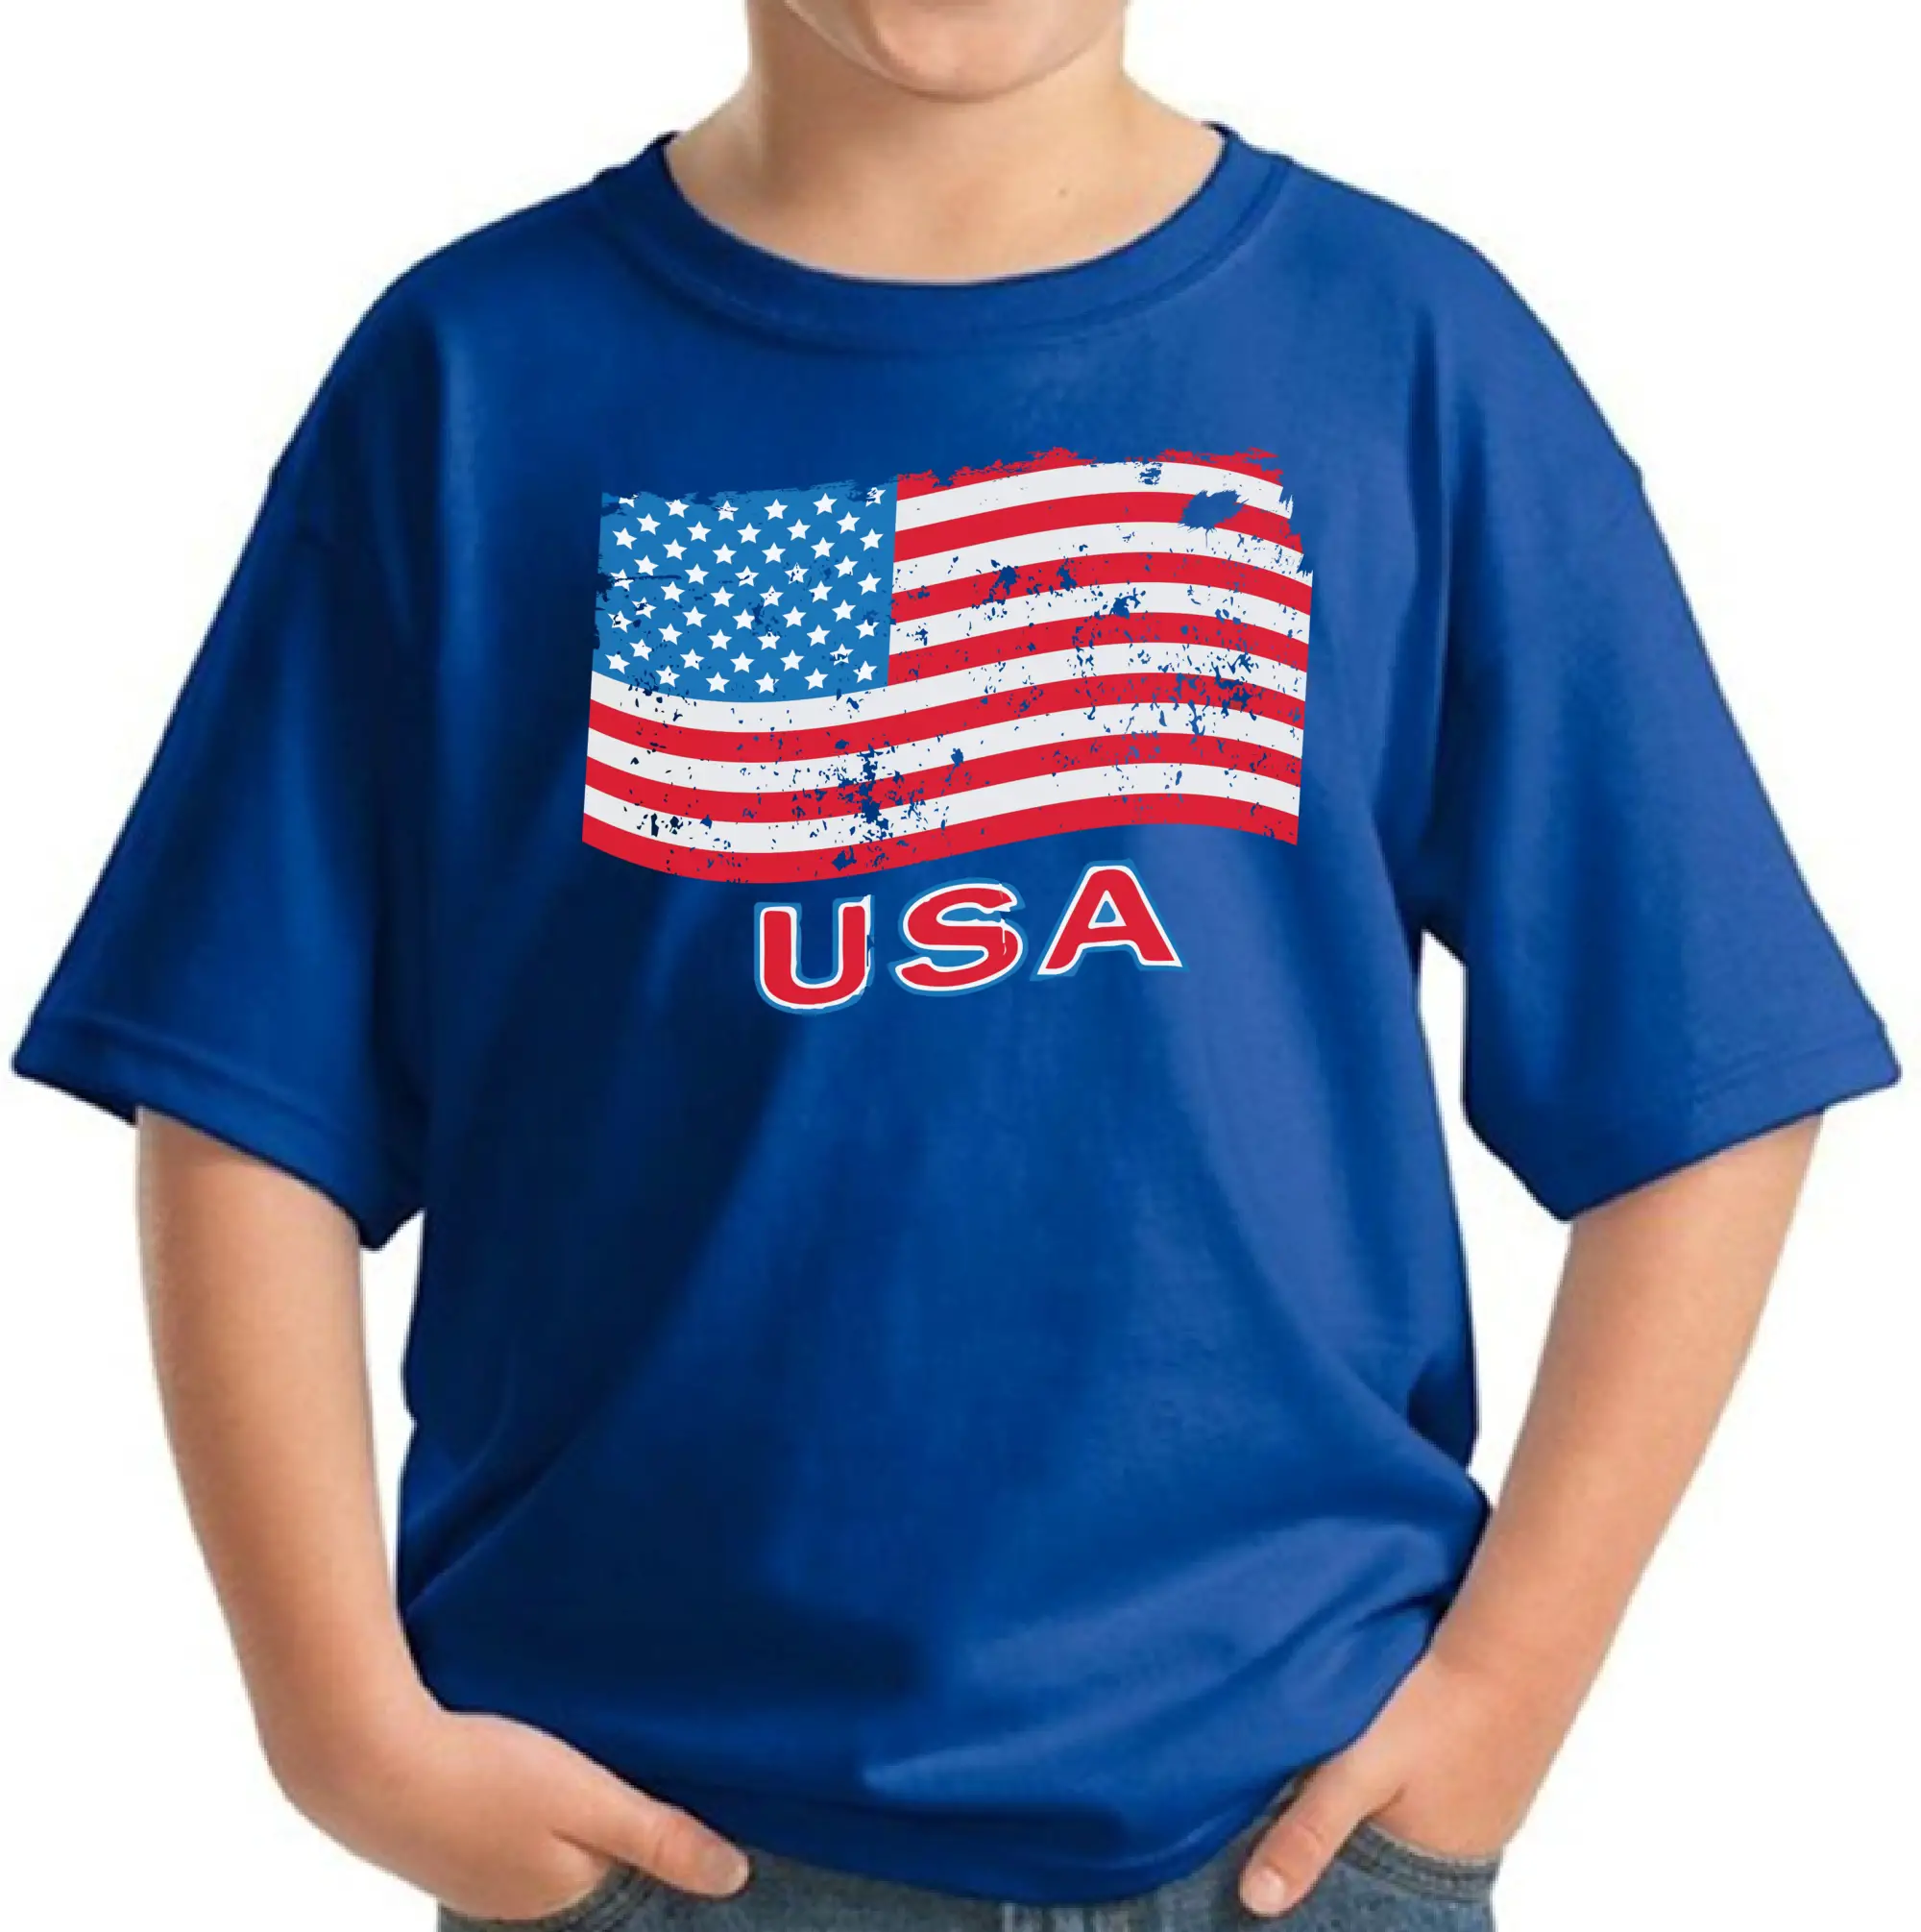 USA Flag Youth Kids T shirt Tops 4th of July Independence Day American ...